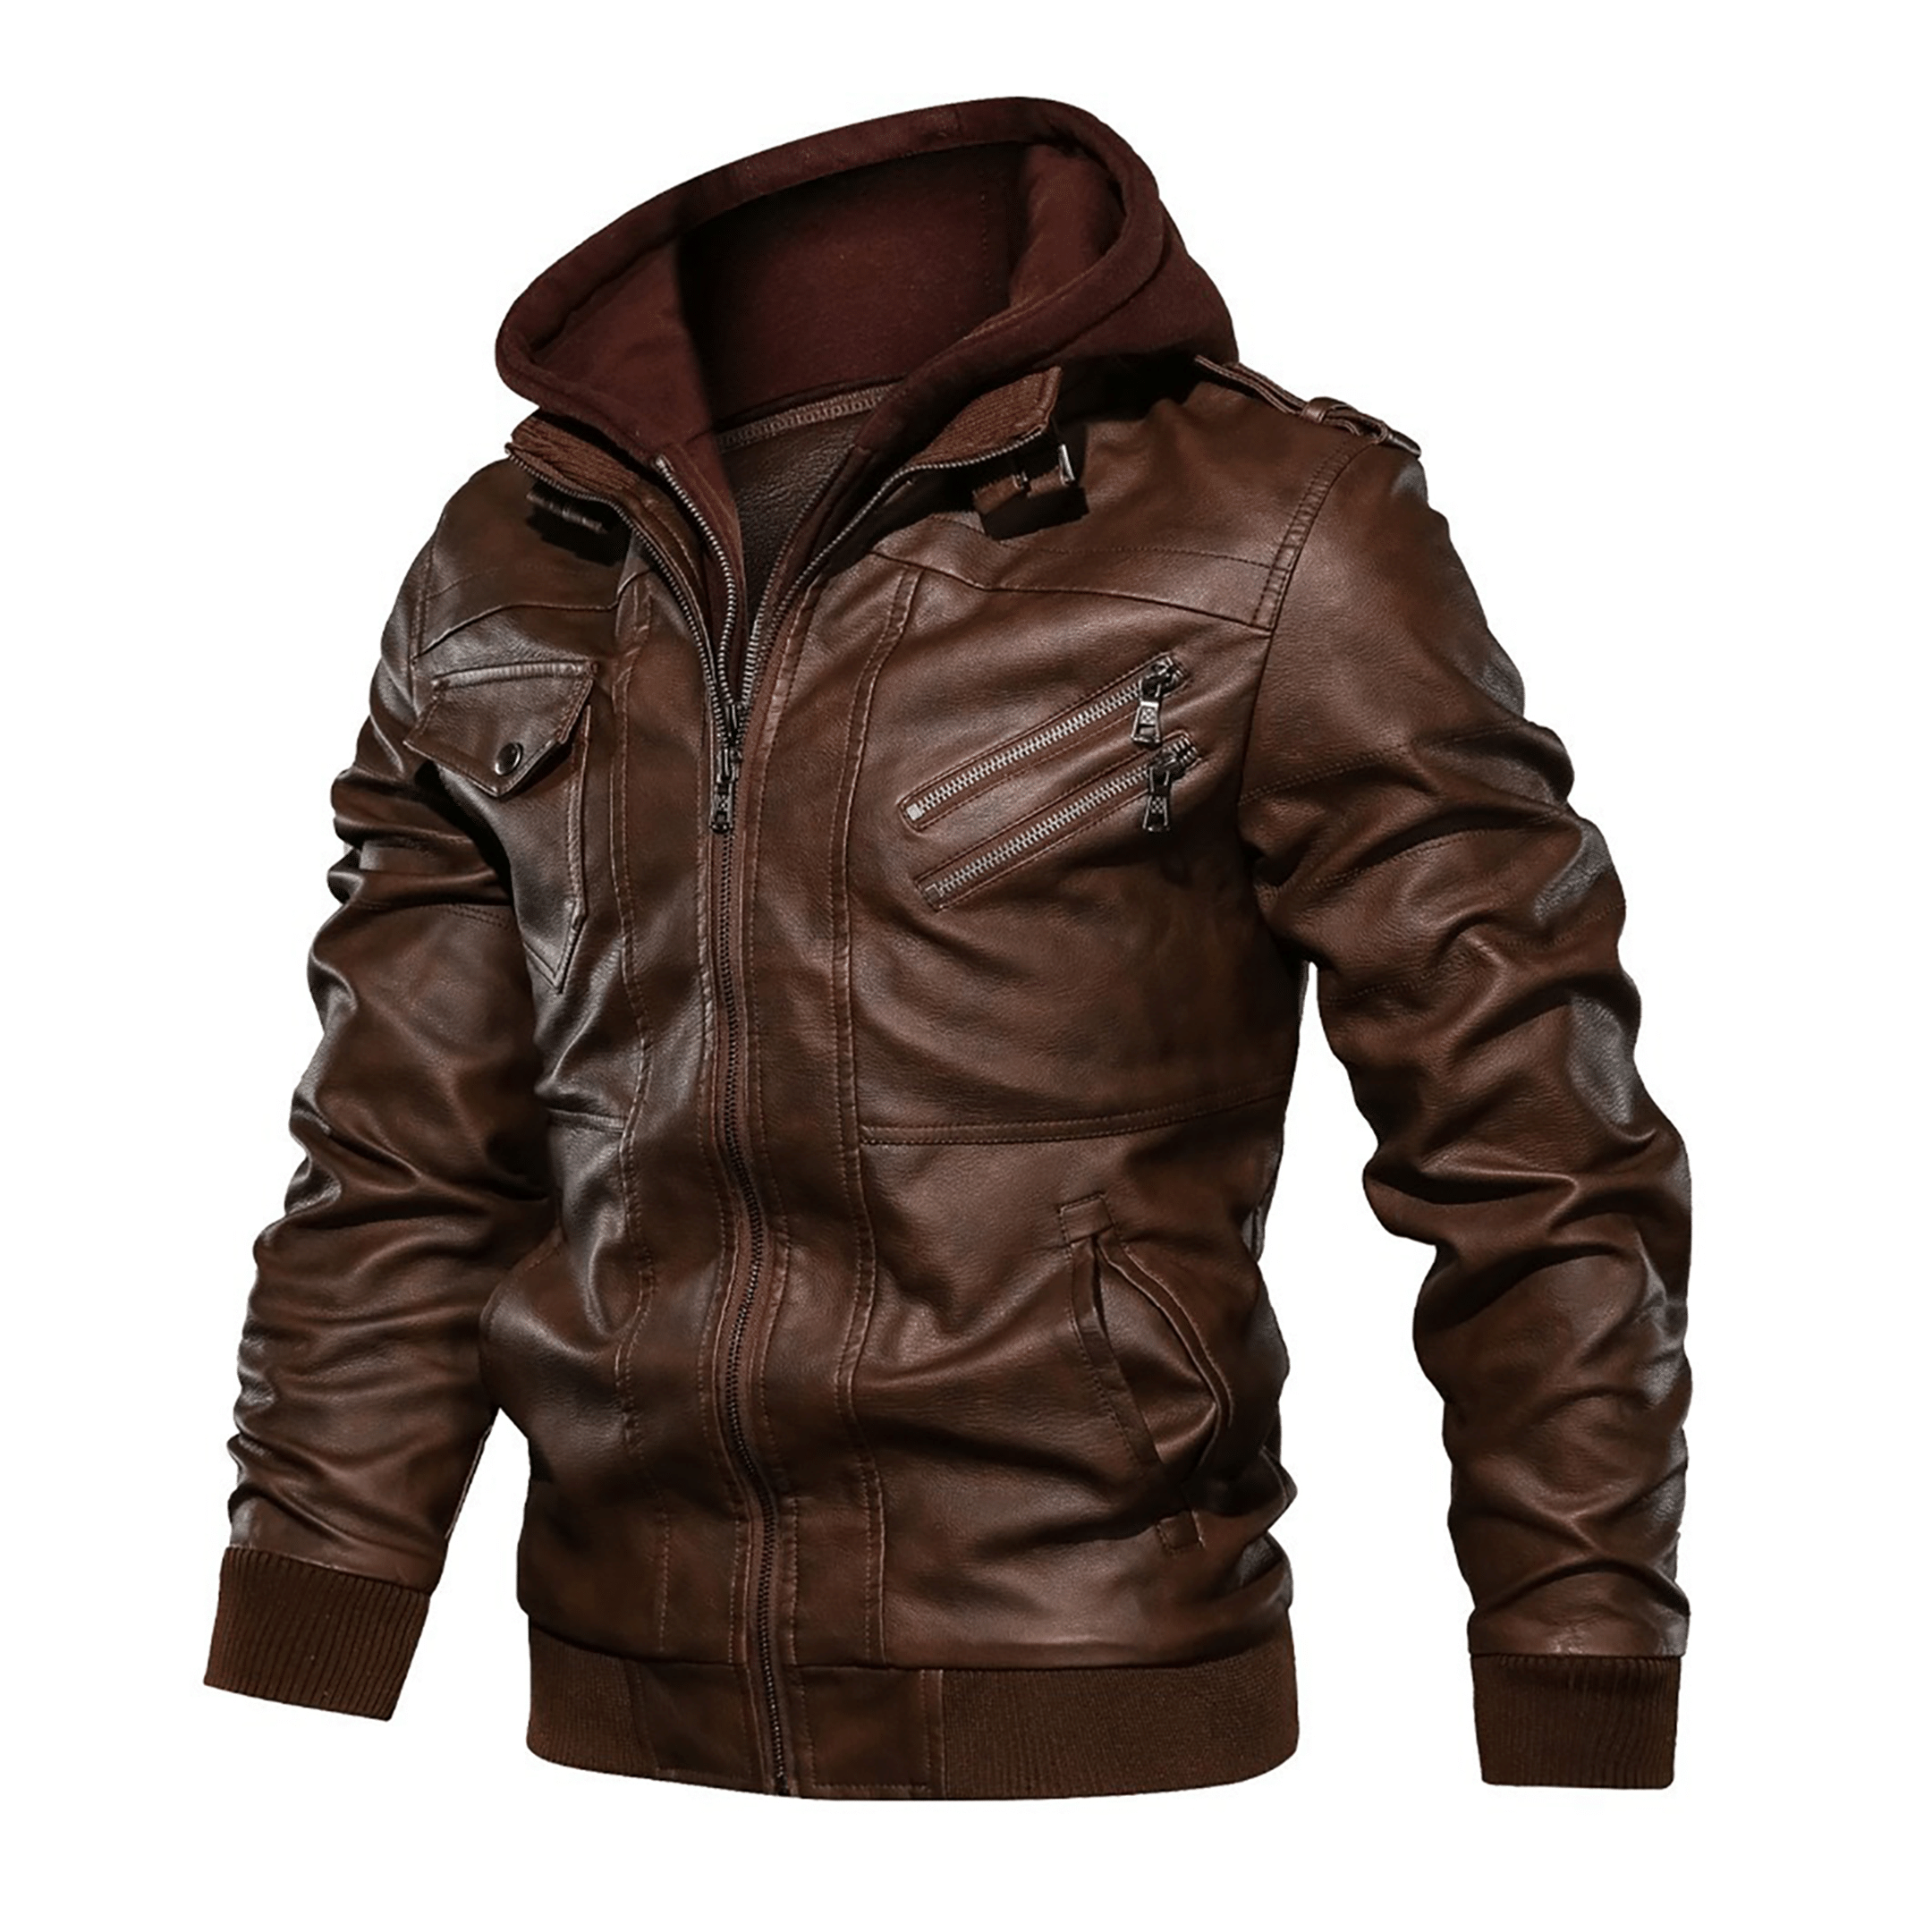 Top leather jackets and latest products 407